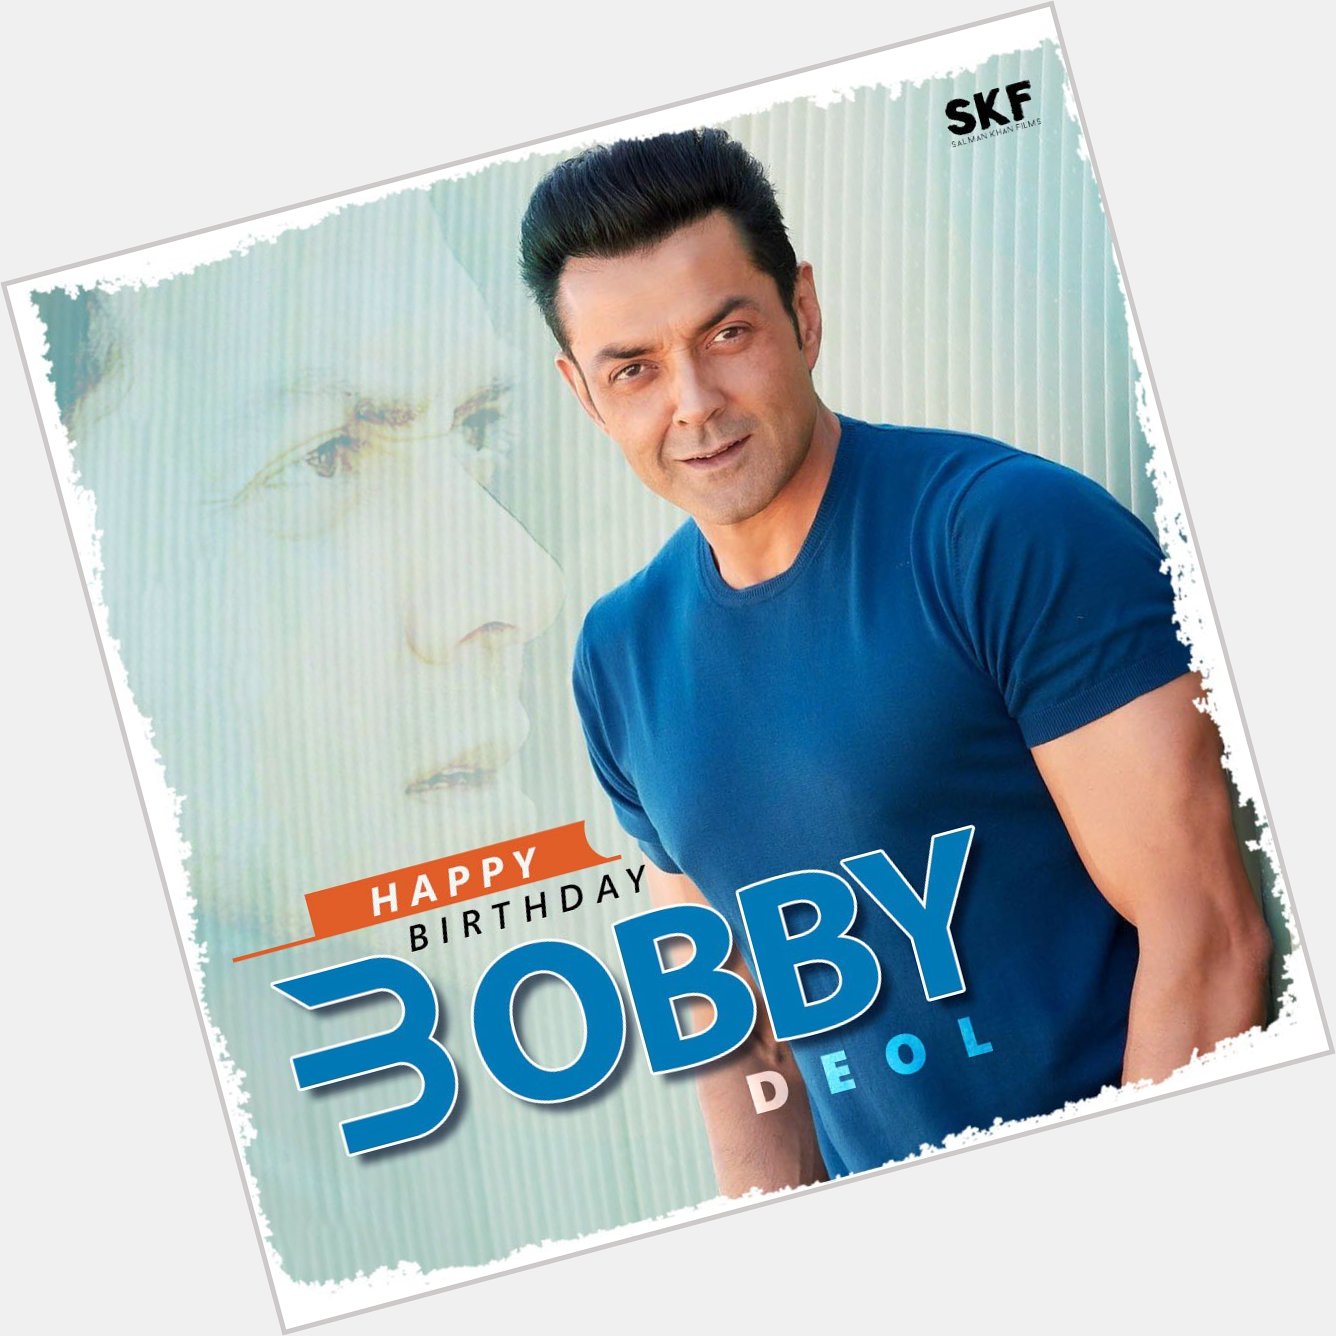 Wishing a very Happy Birthday to our dearest Bobby Deol.  